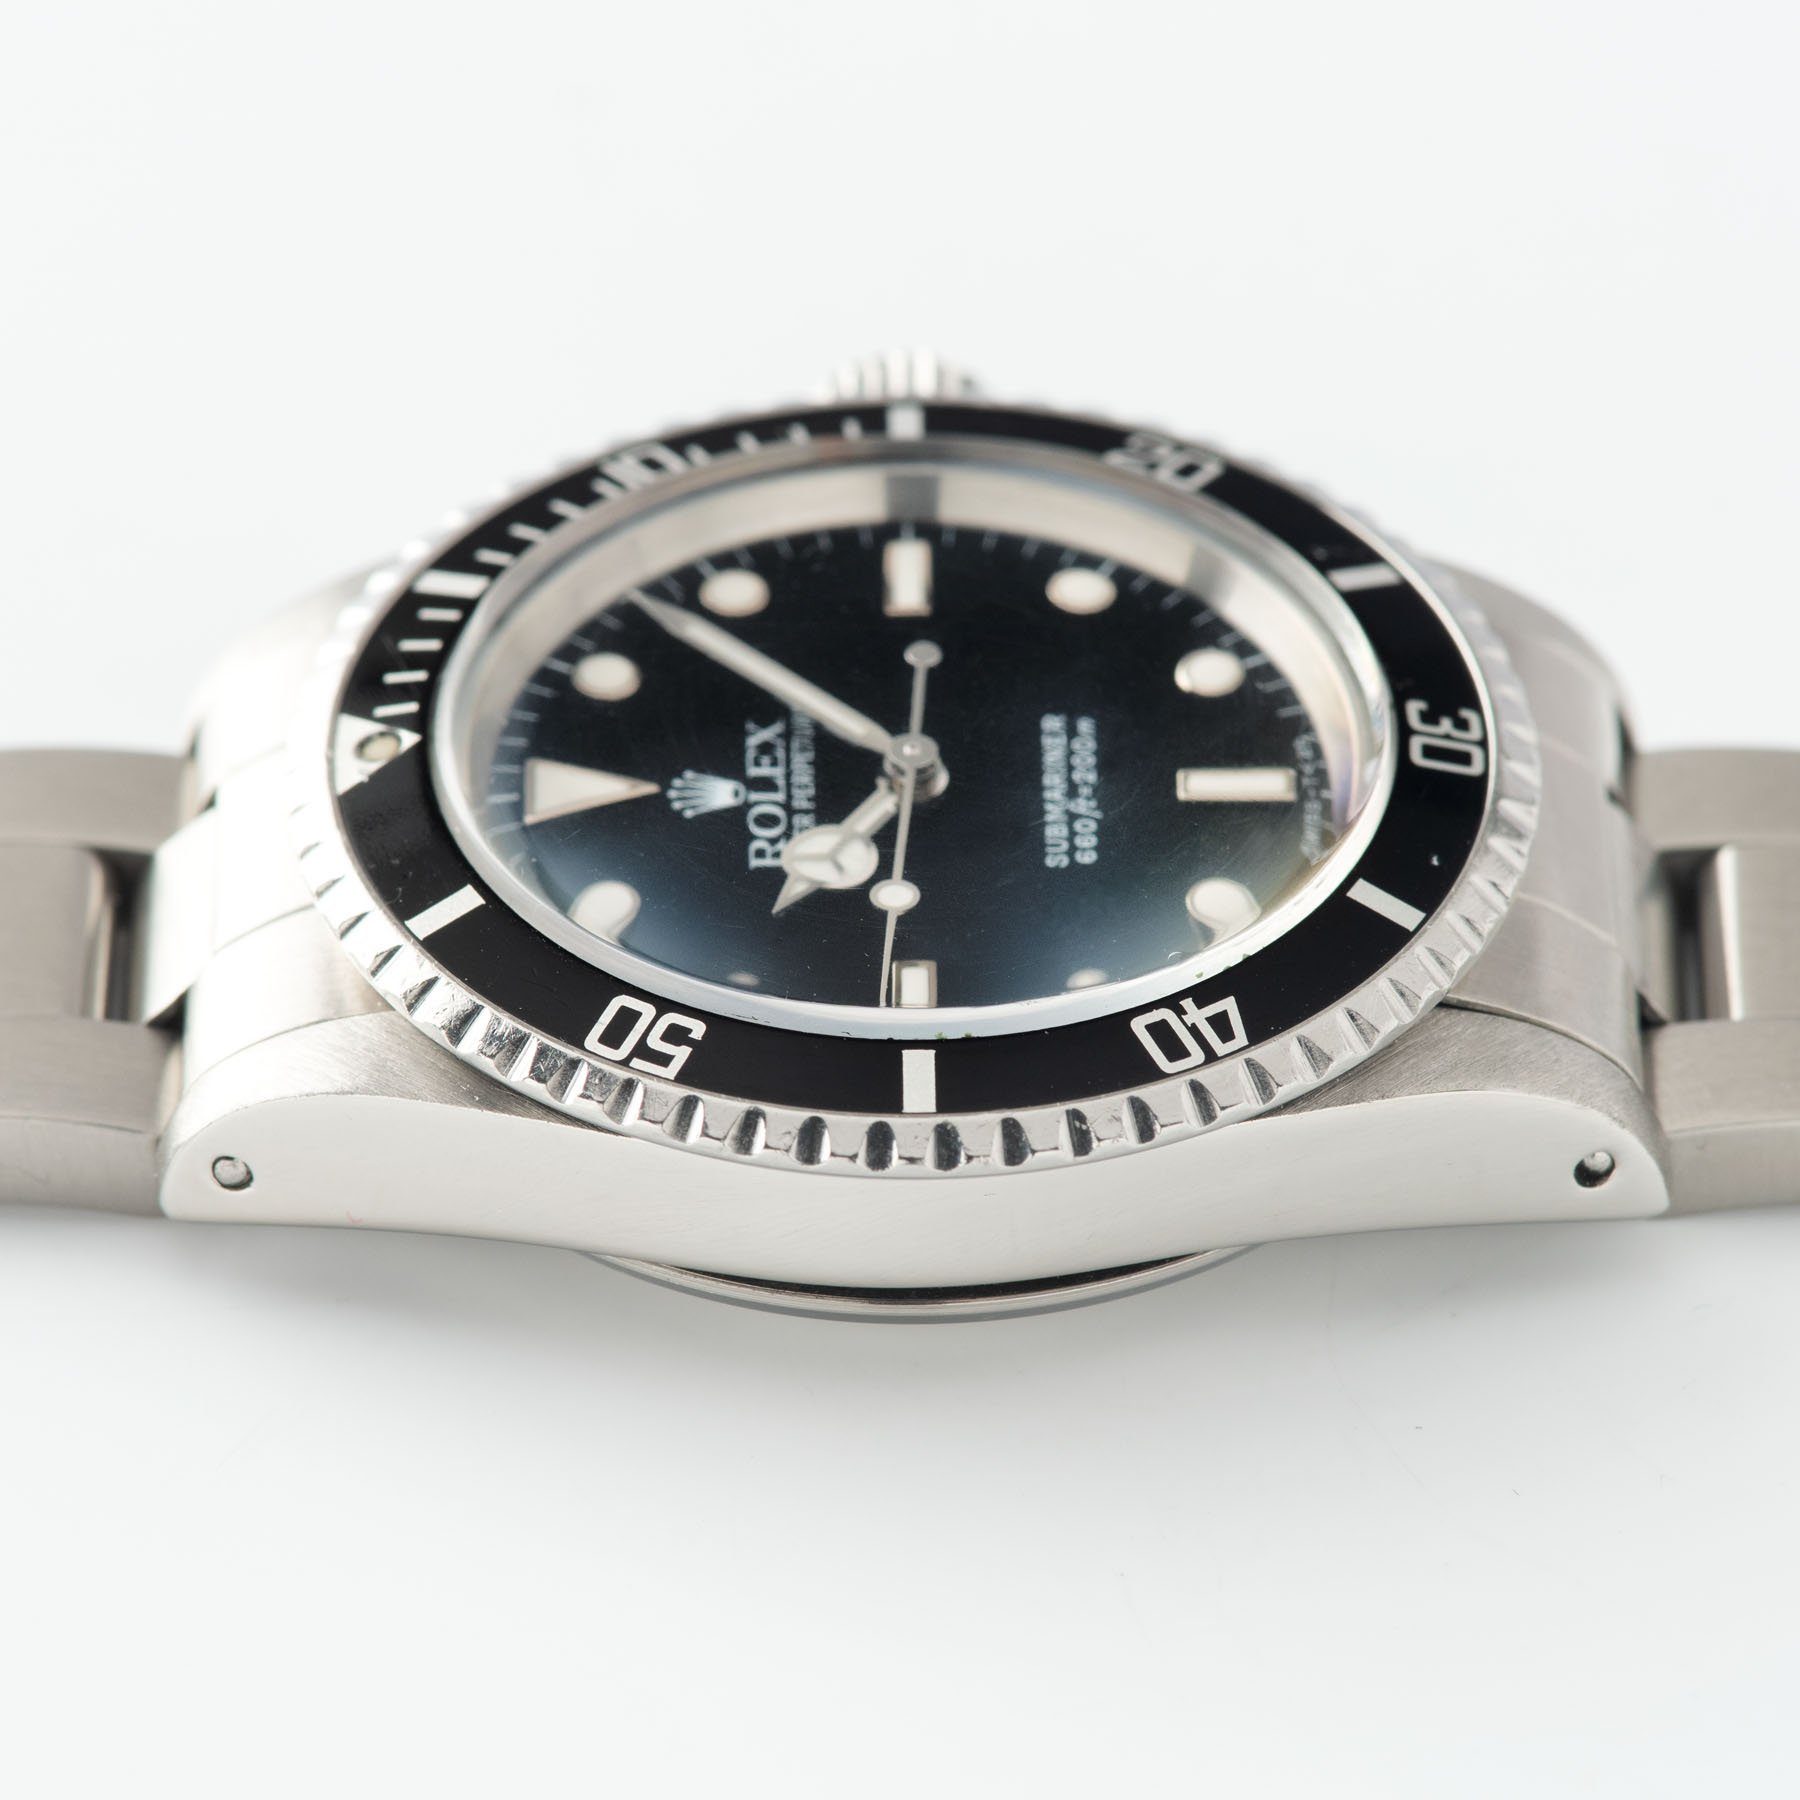 Rolex Submariner 5513 Gloss Dial Box and Papers